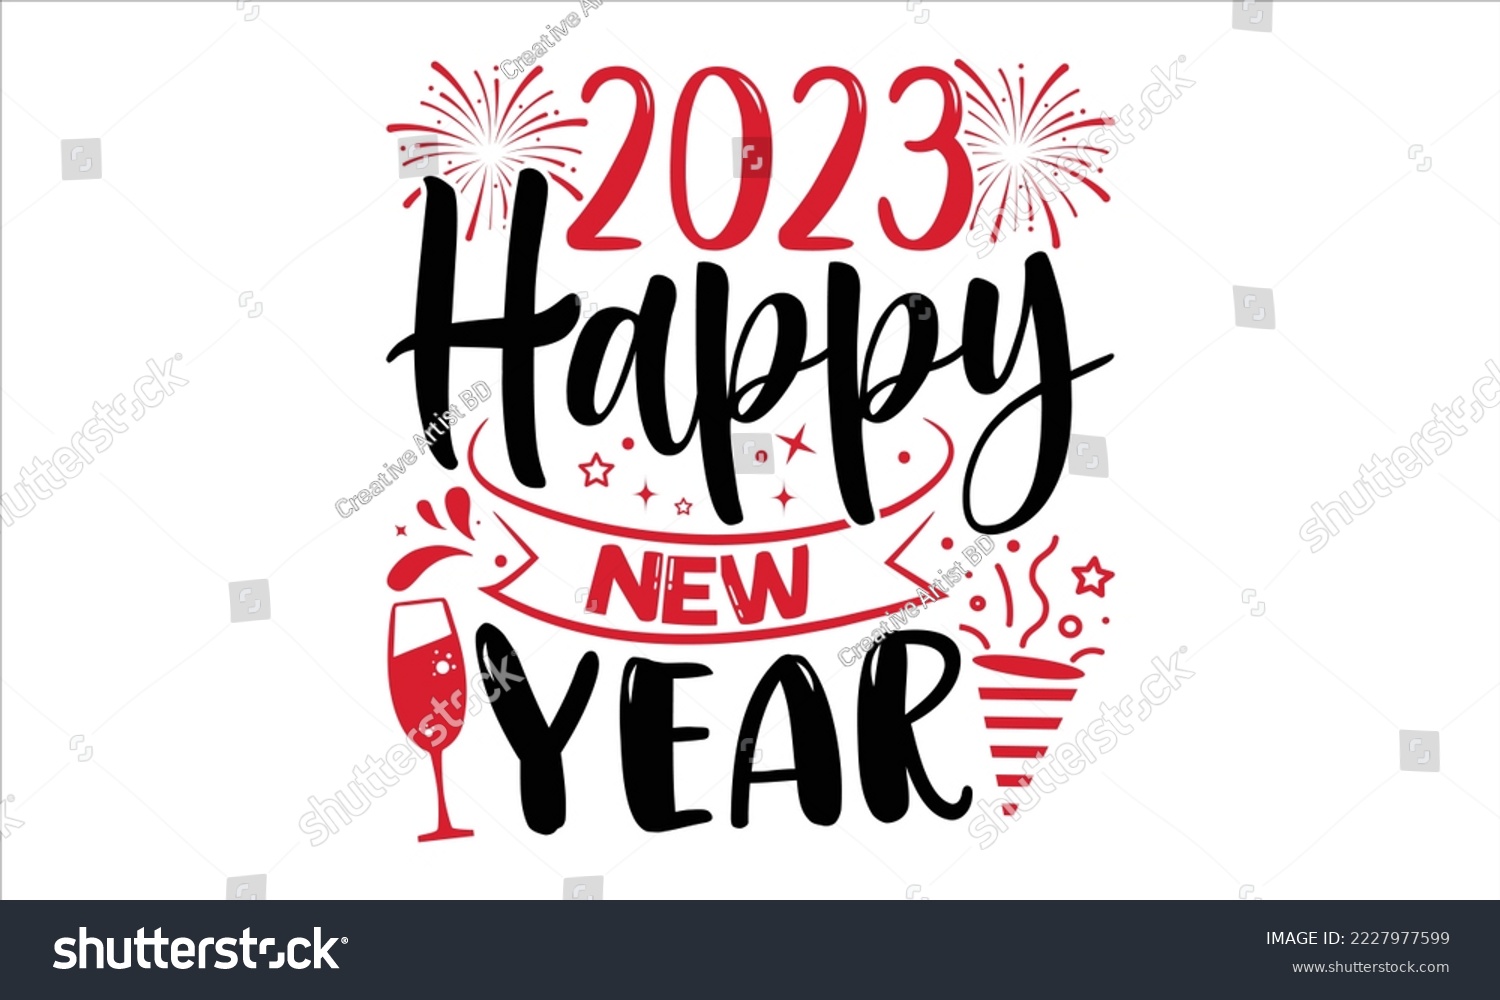 SVG of 2023 Happy New Year  - Happy New Year  T shirt Design, Hand drawn vintage illustration with hand-lettering and decoration elements, Cut Files for Cricut Svg, Digital Download svg